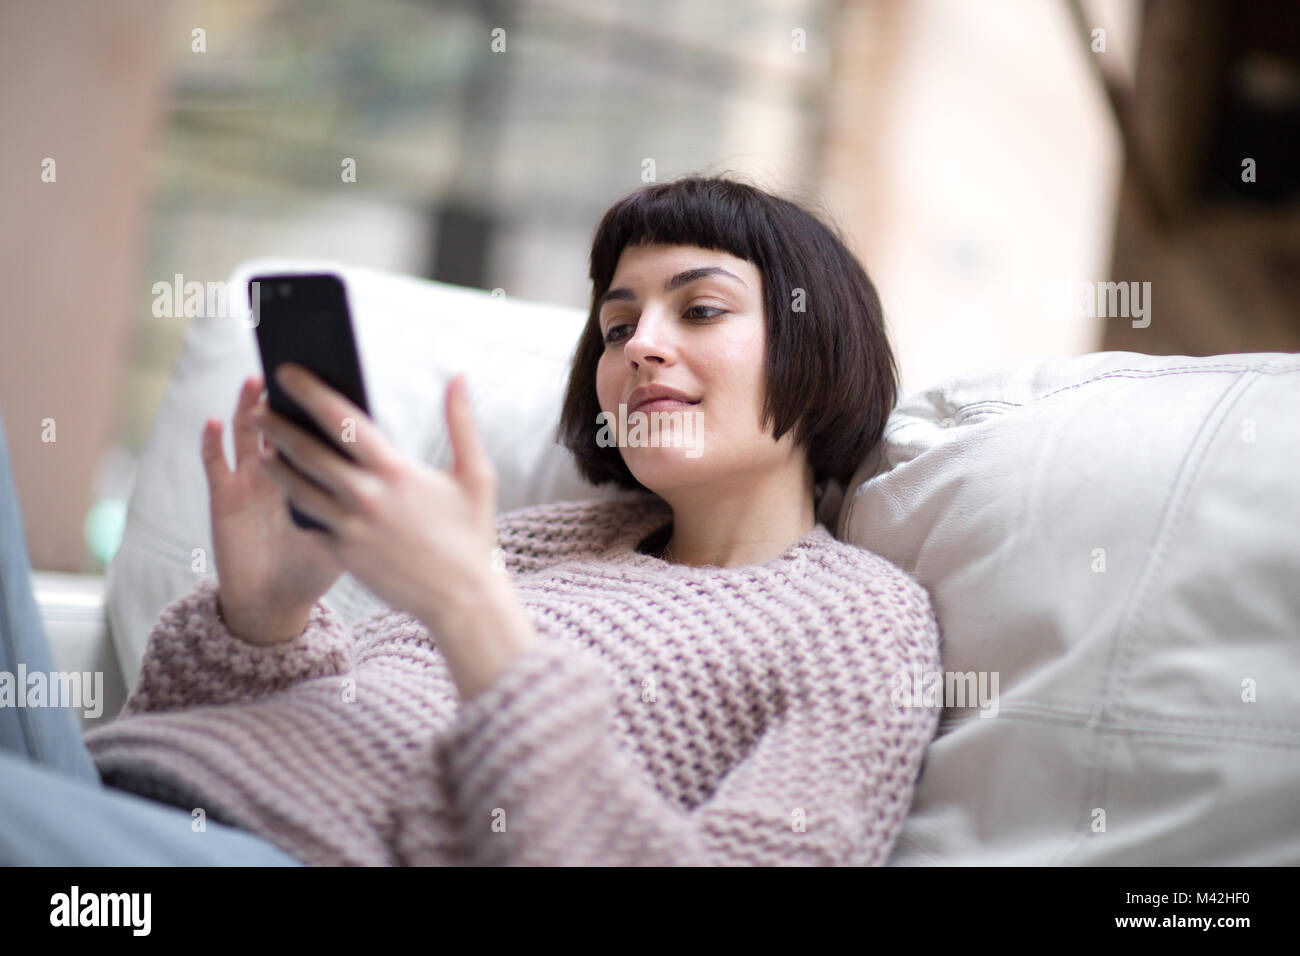 Young adult female on smartphone Stock Photo